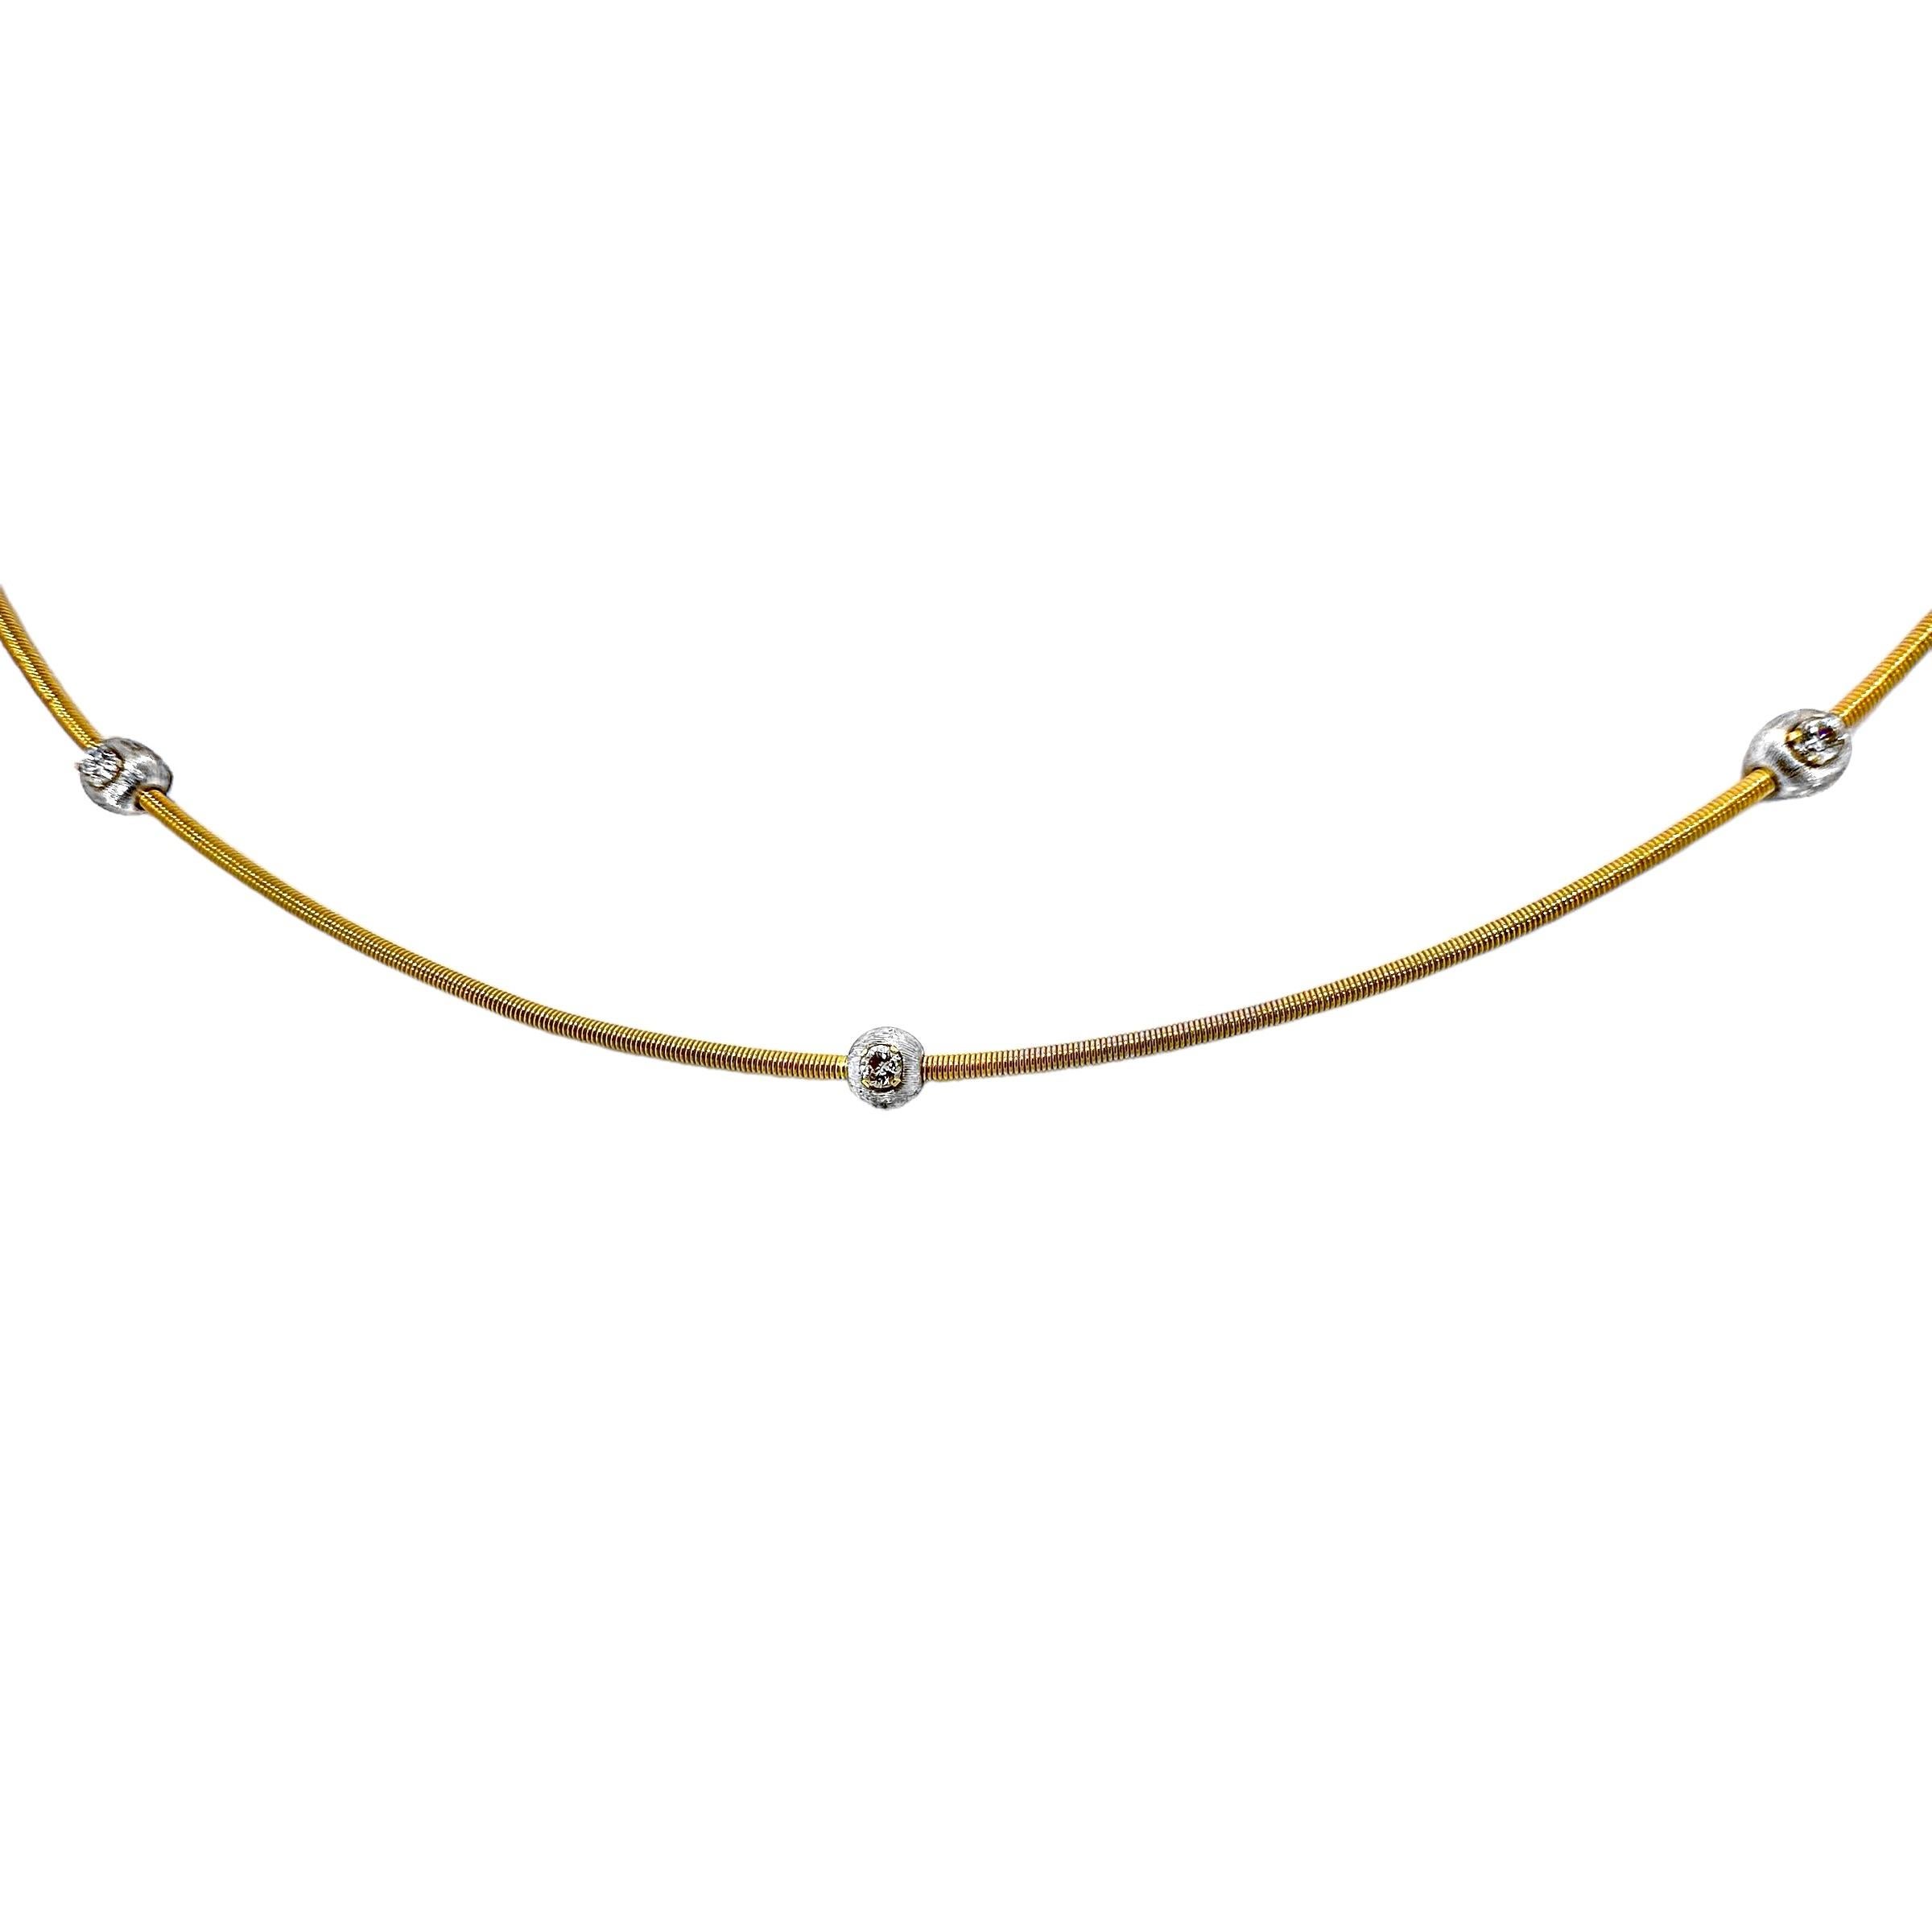 This stylish, contemporary  18k yellow and white gold and diamond choker necklace is precision crafted in the finest Italian gold manufacturing tradition. This lightweight beauty is comfortable to wear, and is ideal for causal wear, day or night.